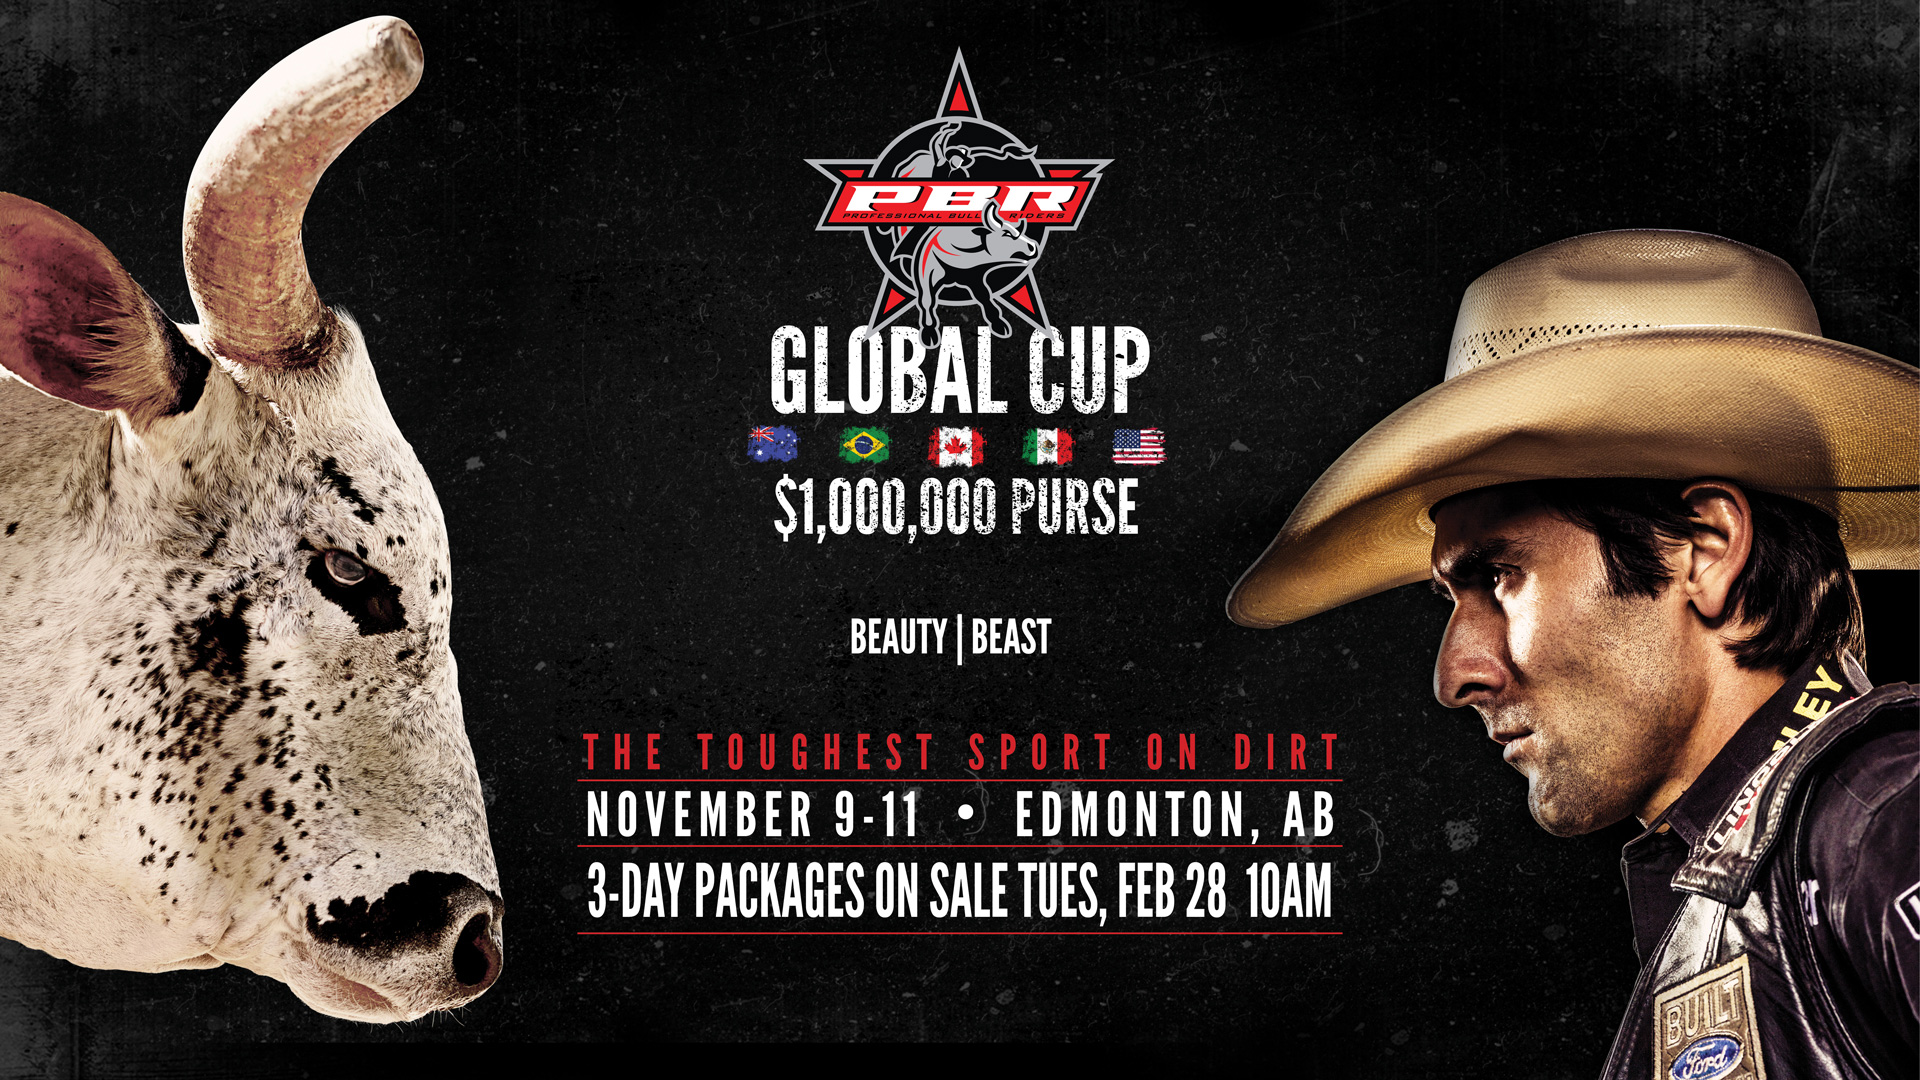 Global Cup Pbr 2017 , HD Wallpaper & Backgrounds